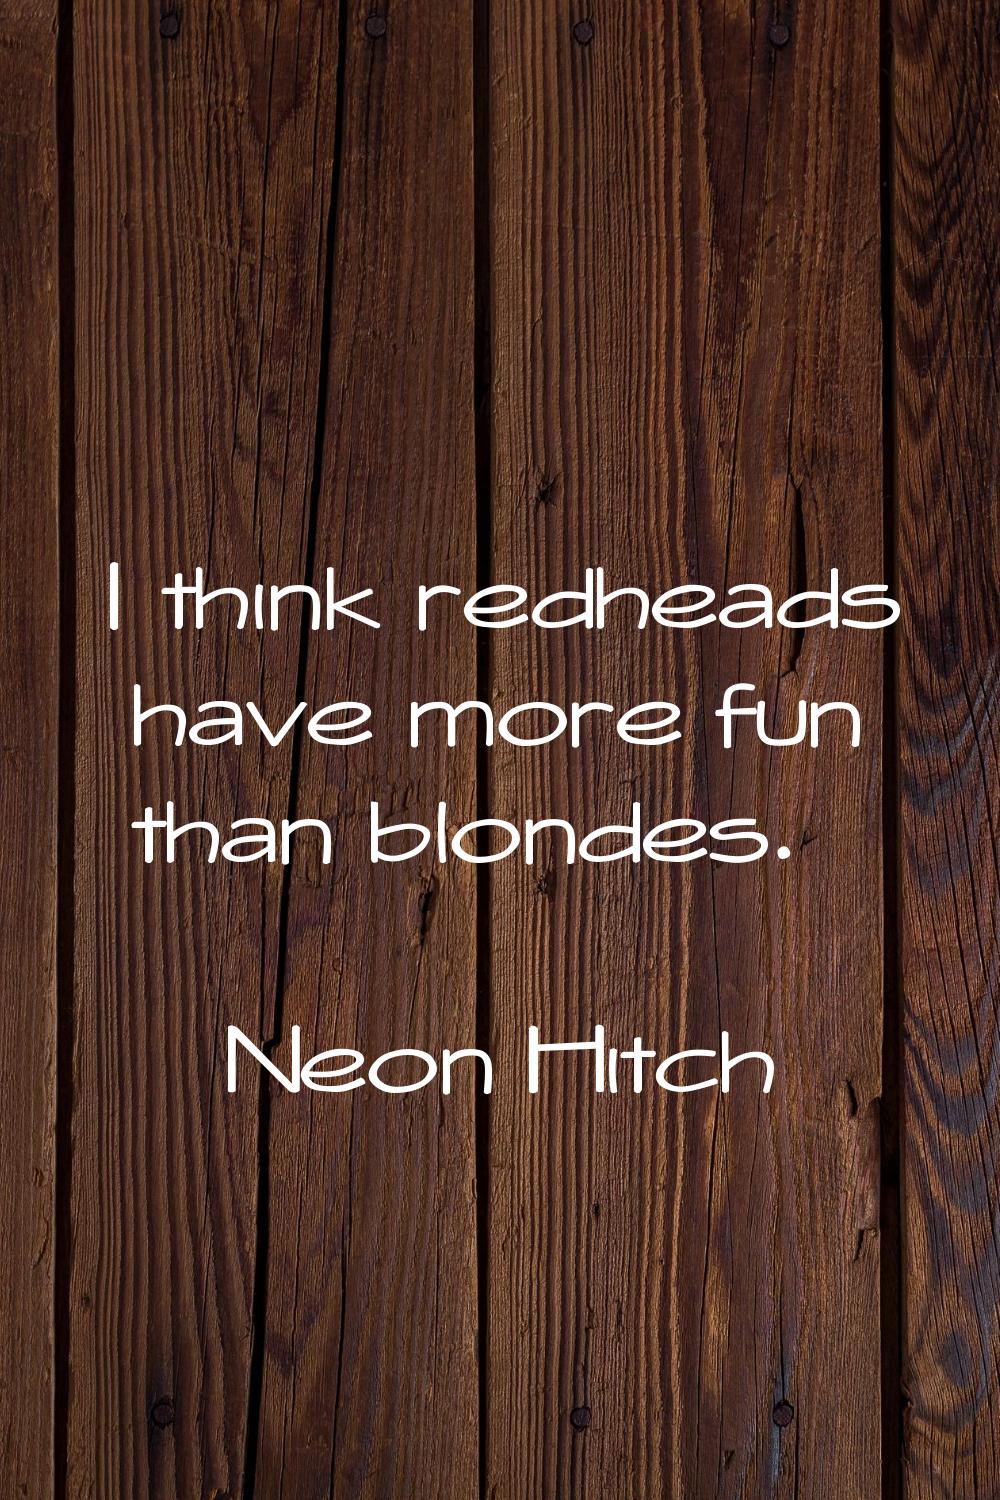 I think redheads have more fun than blondes.